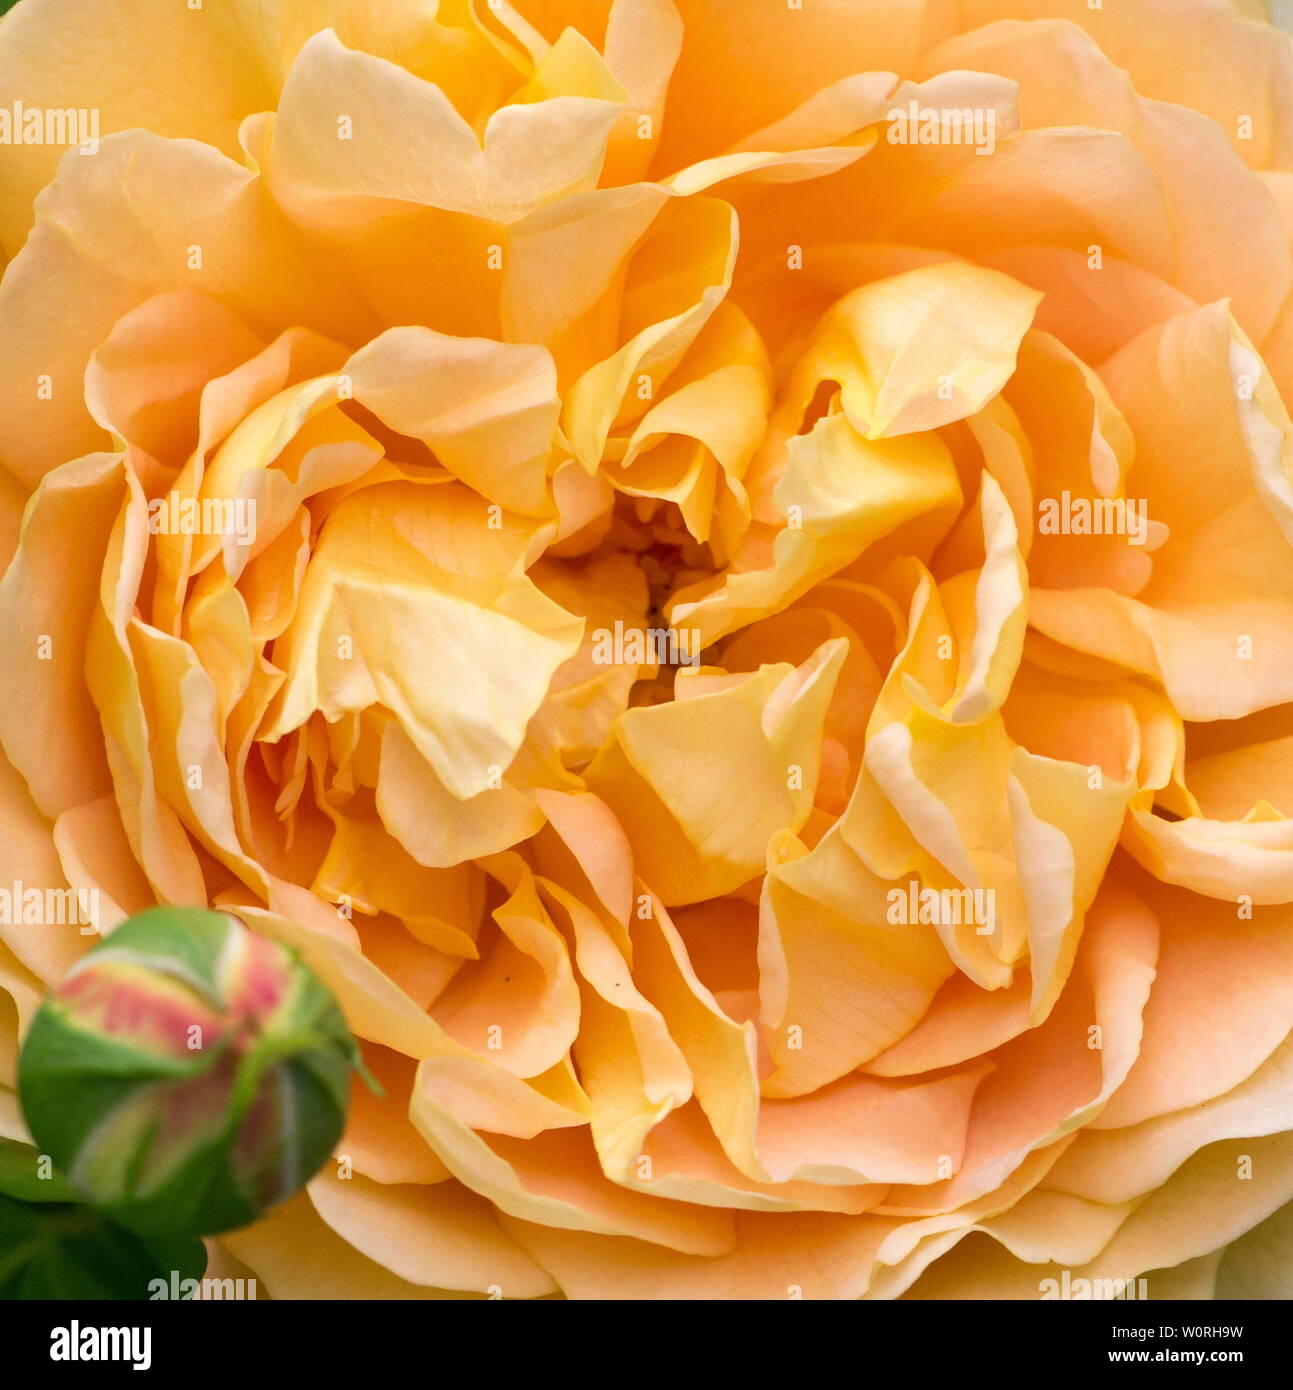 Blooming yellow rose in the garden on a sunny day. David Austin Rose Golden Celebration Stock Photo